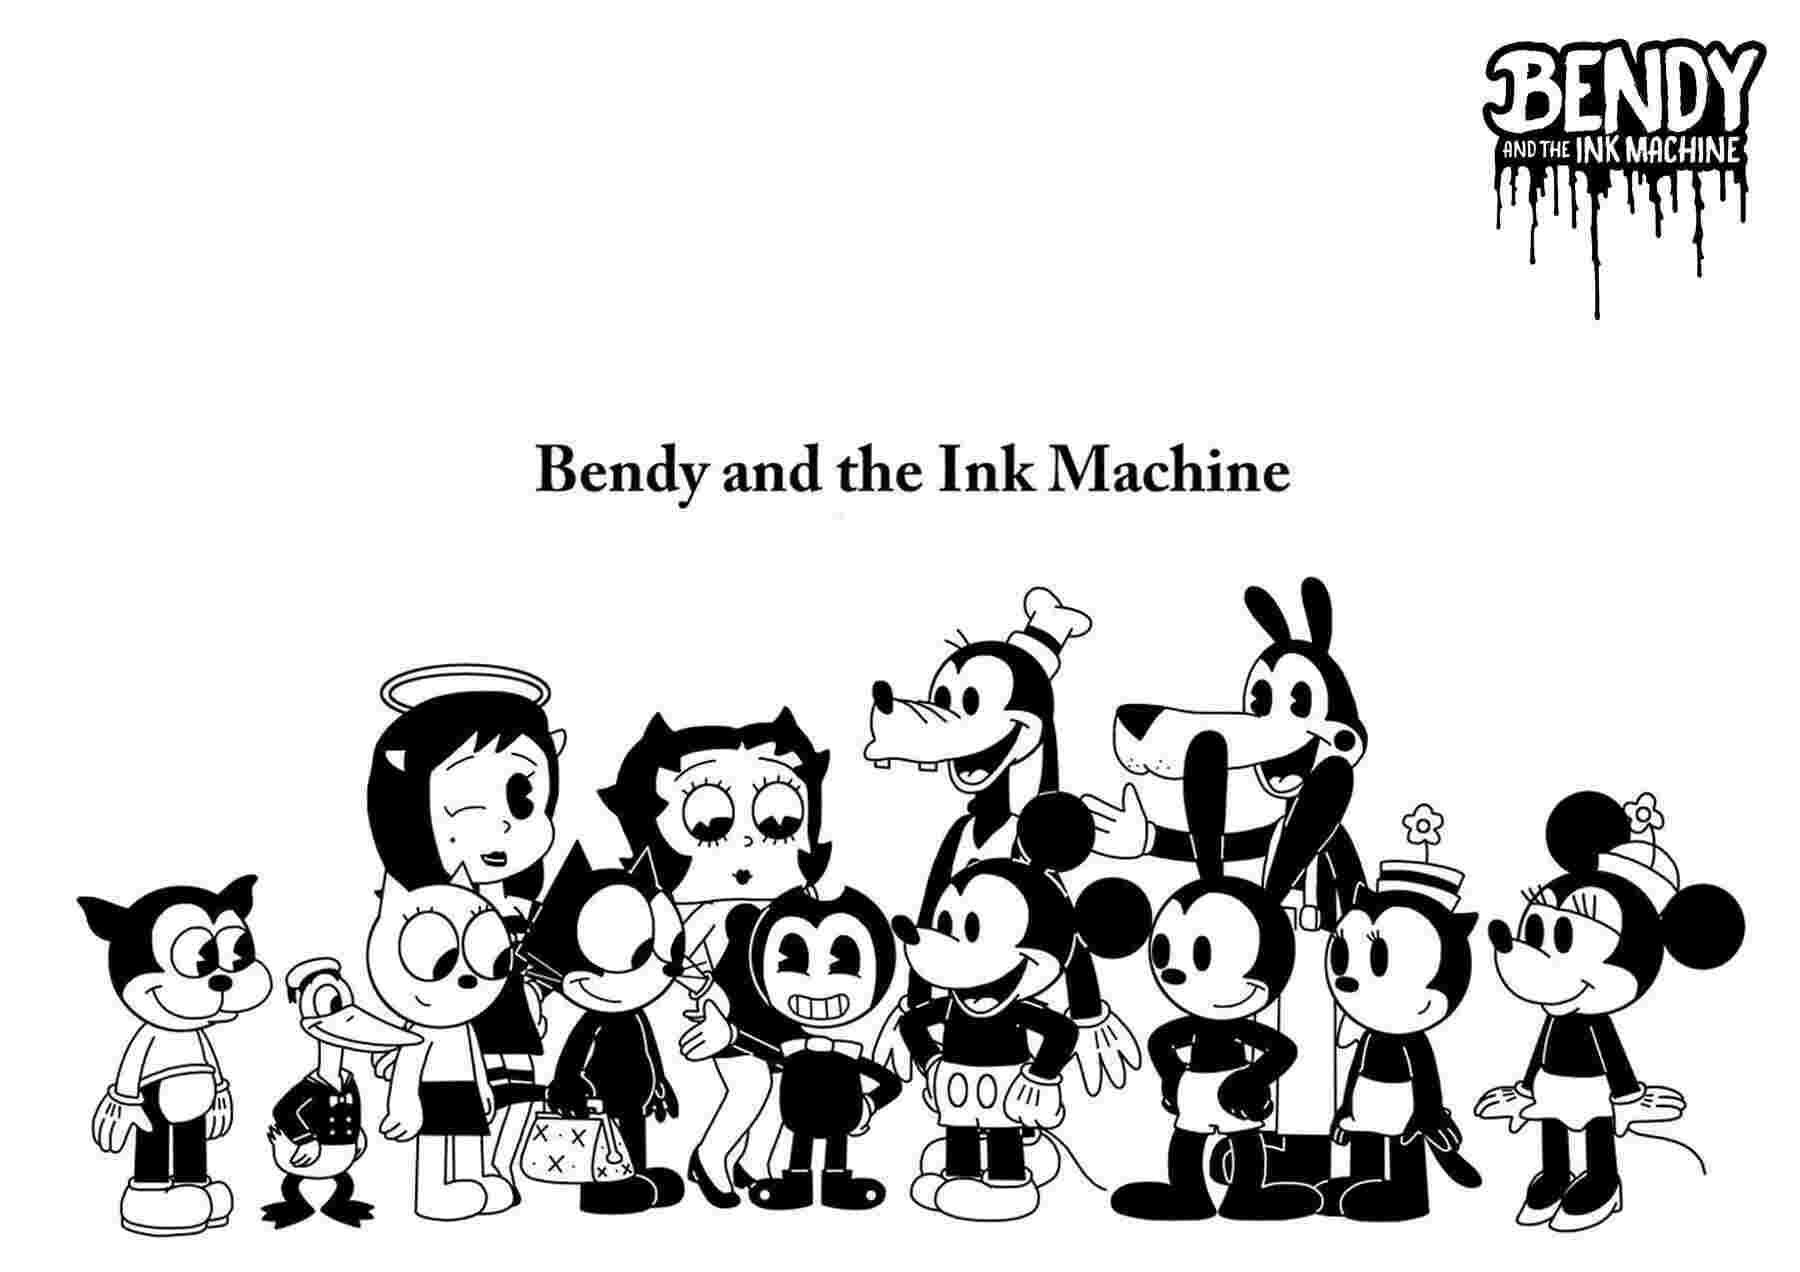 Little Bendy and his best friends from Bendy and the Ink Machine from Bendy